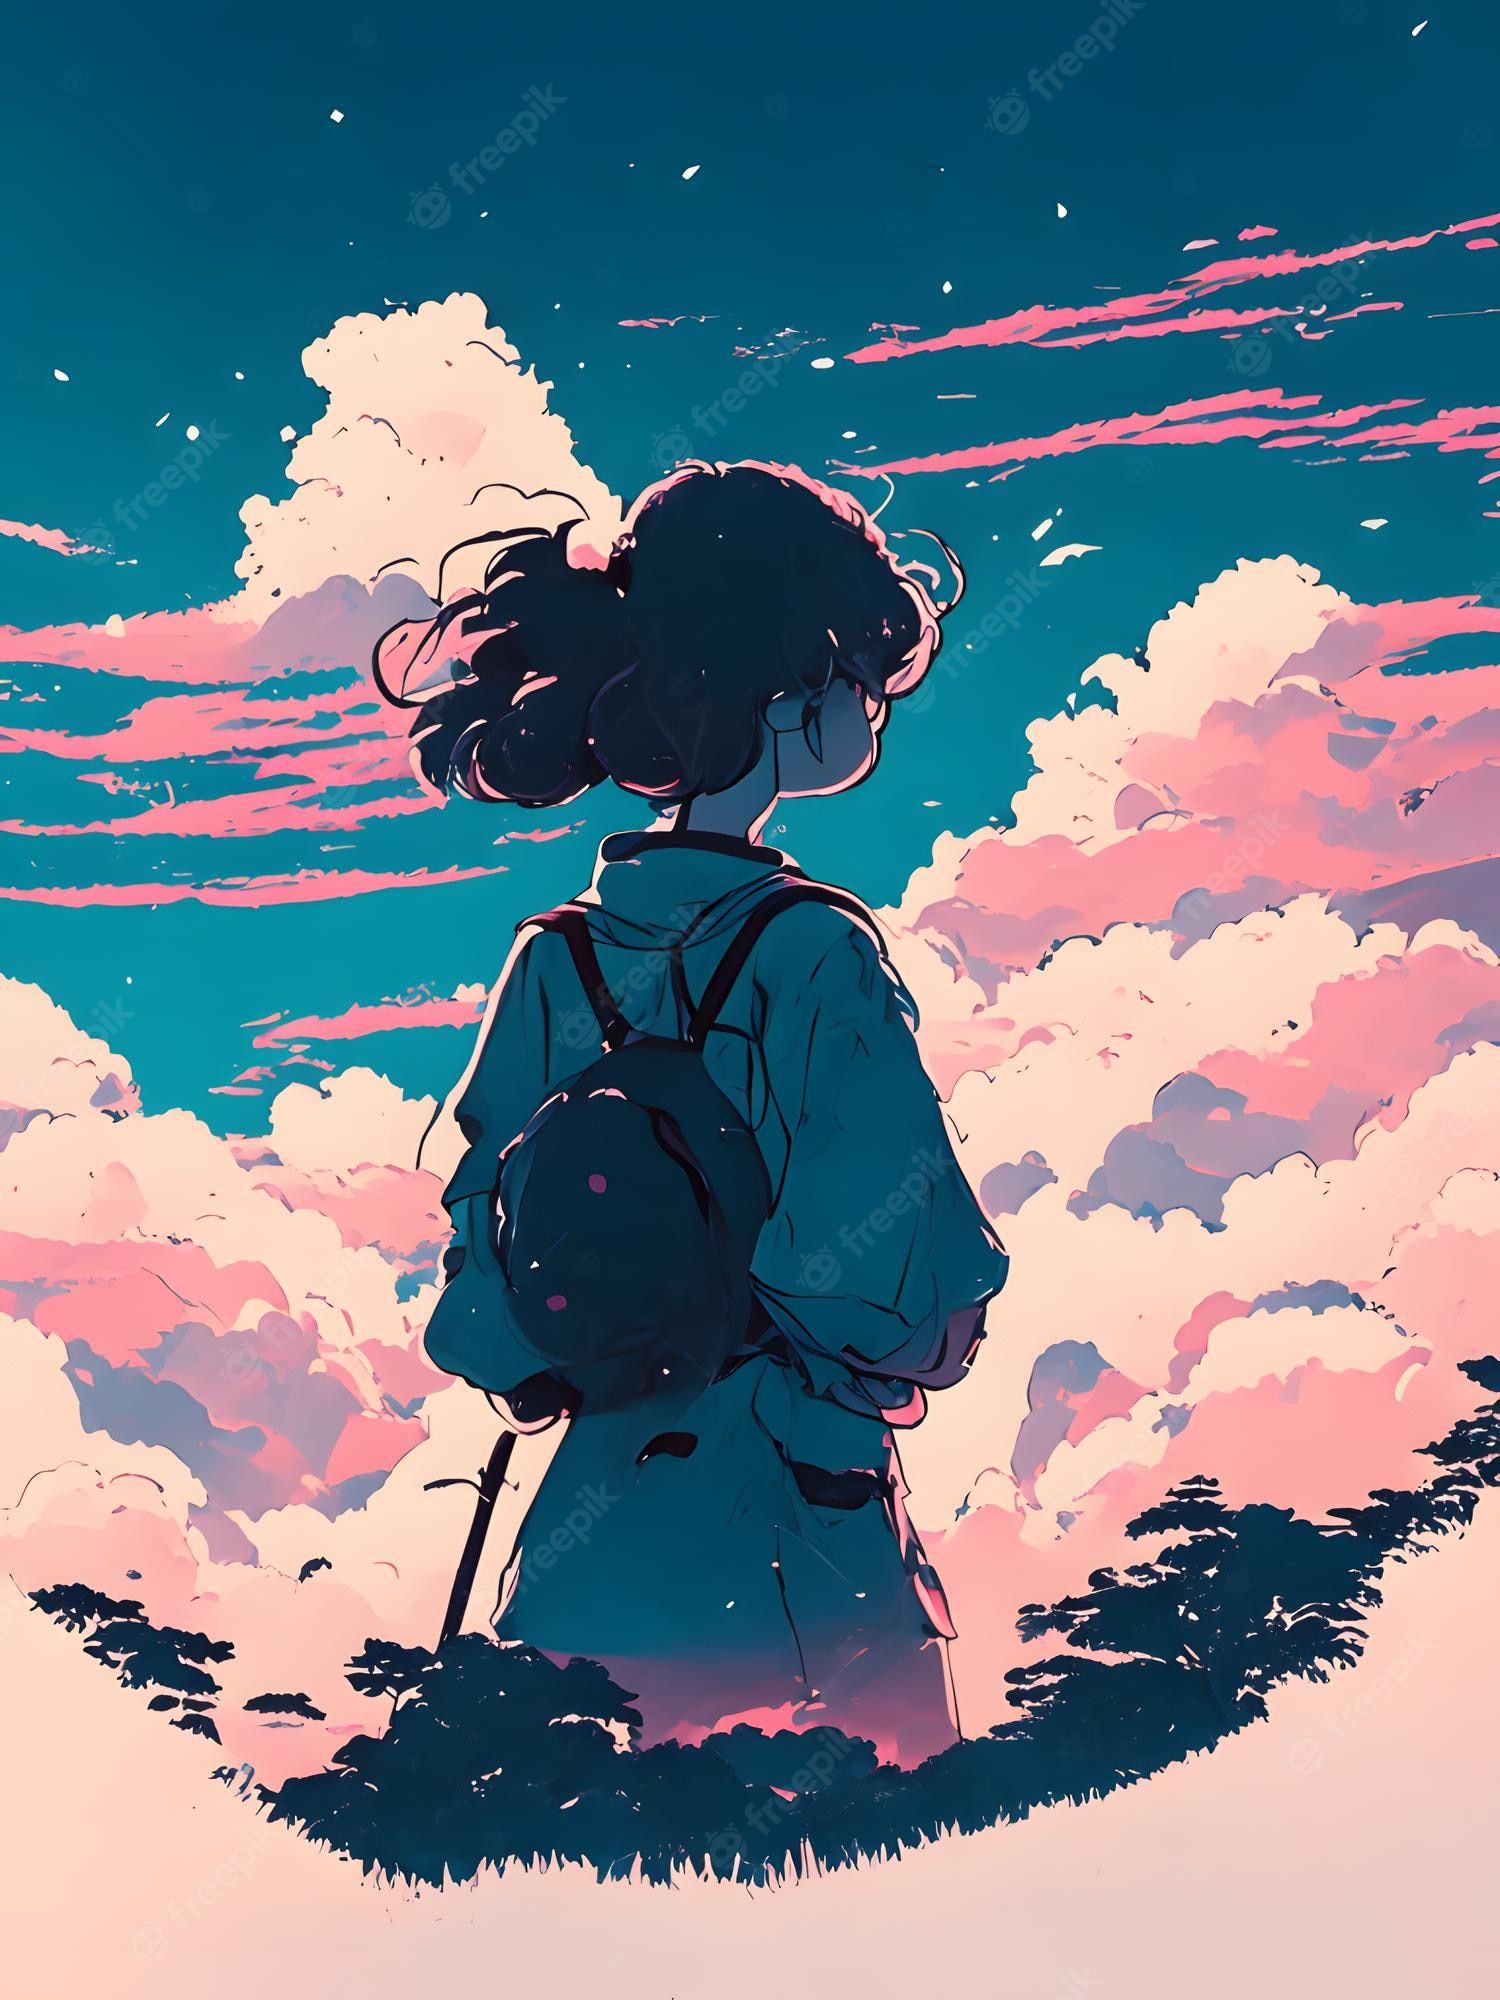 Anime girl standing on the hill with beautiful sky background, illustration painting - Anime girl